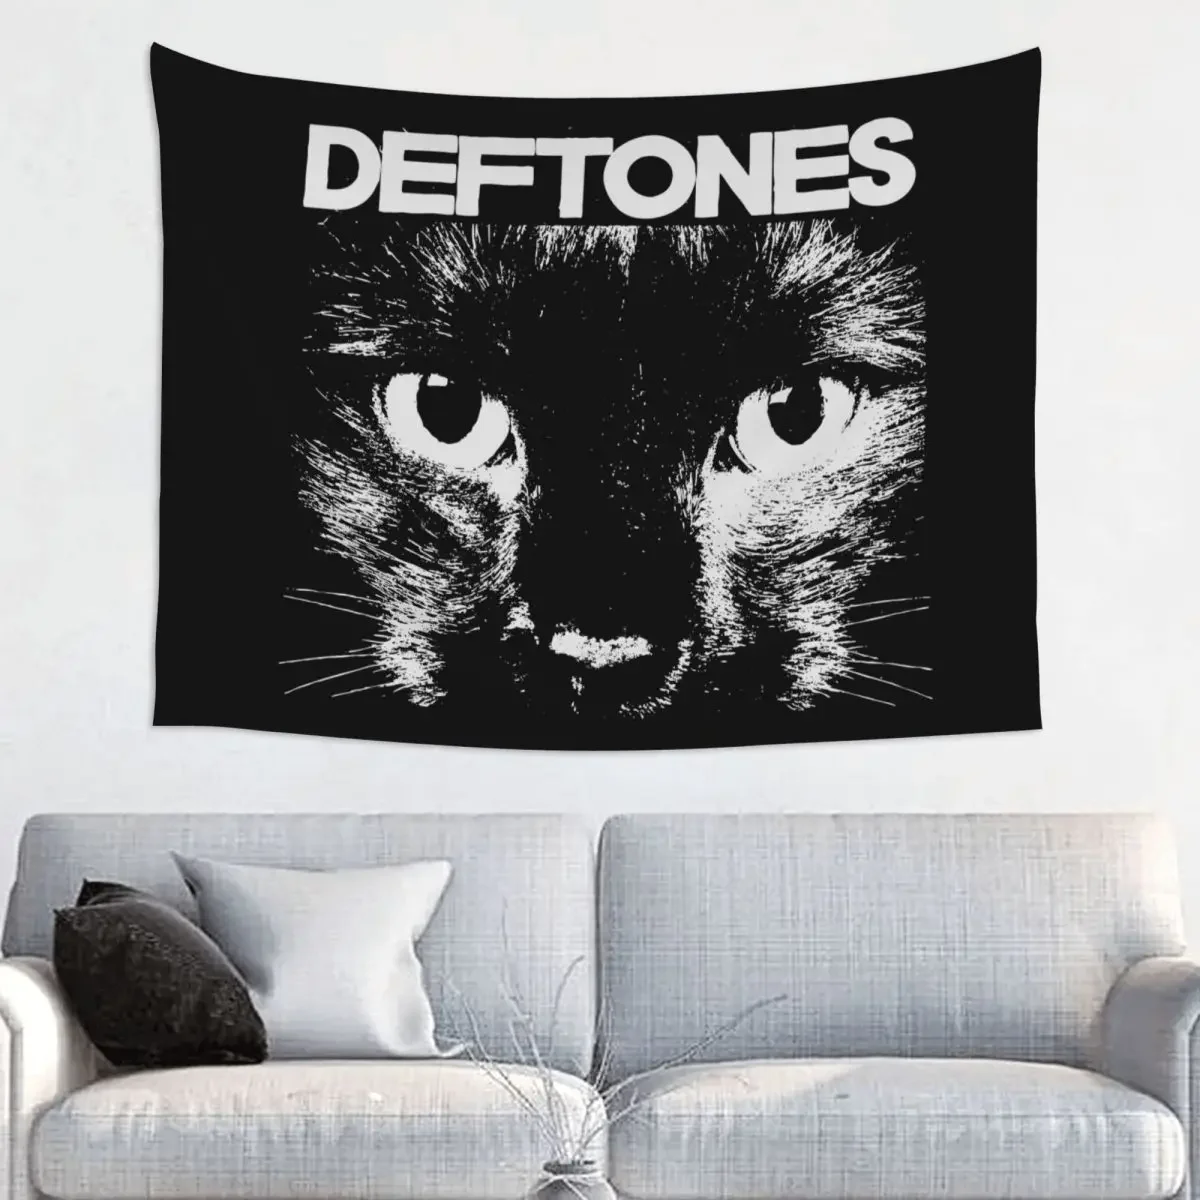 

Deftones Cat Tapestry Wall Hanging Polyester Wall Tapestry Punk Hip Hop Fantasy Throw Rug Blanket Room Home Decor Yoga Mat